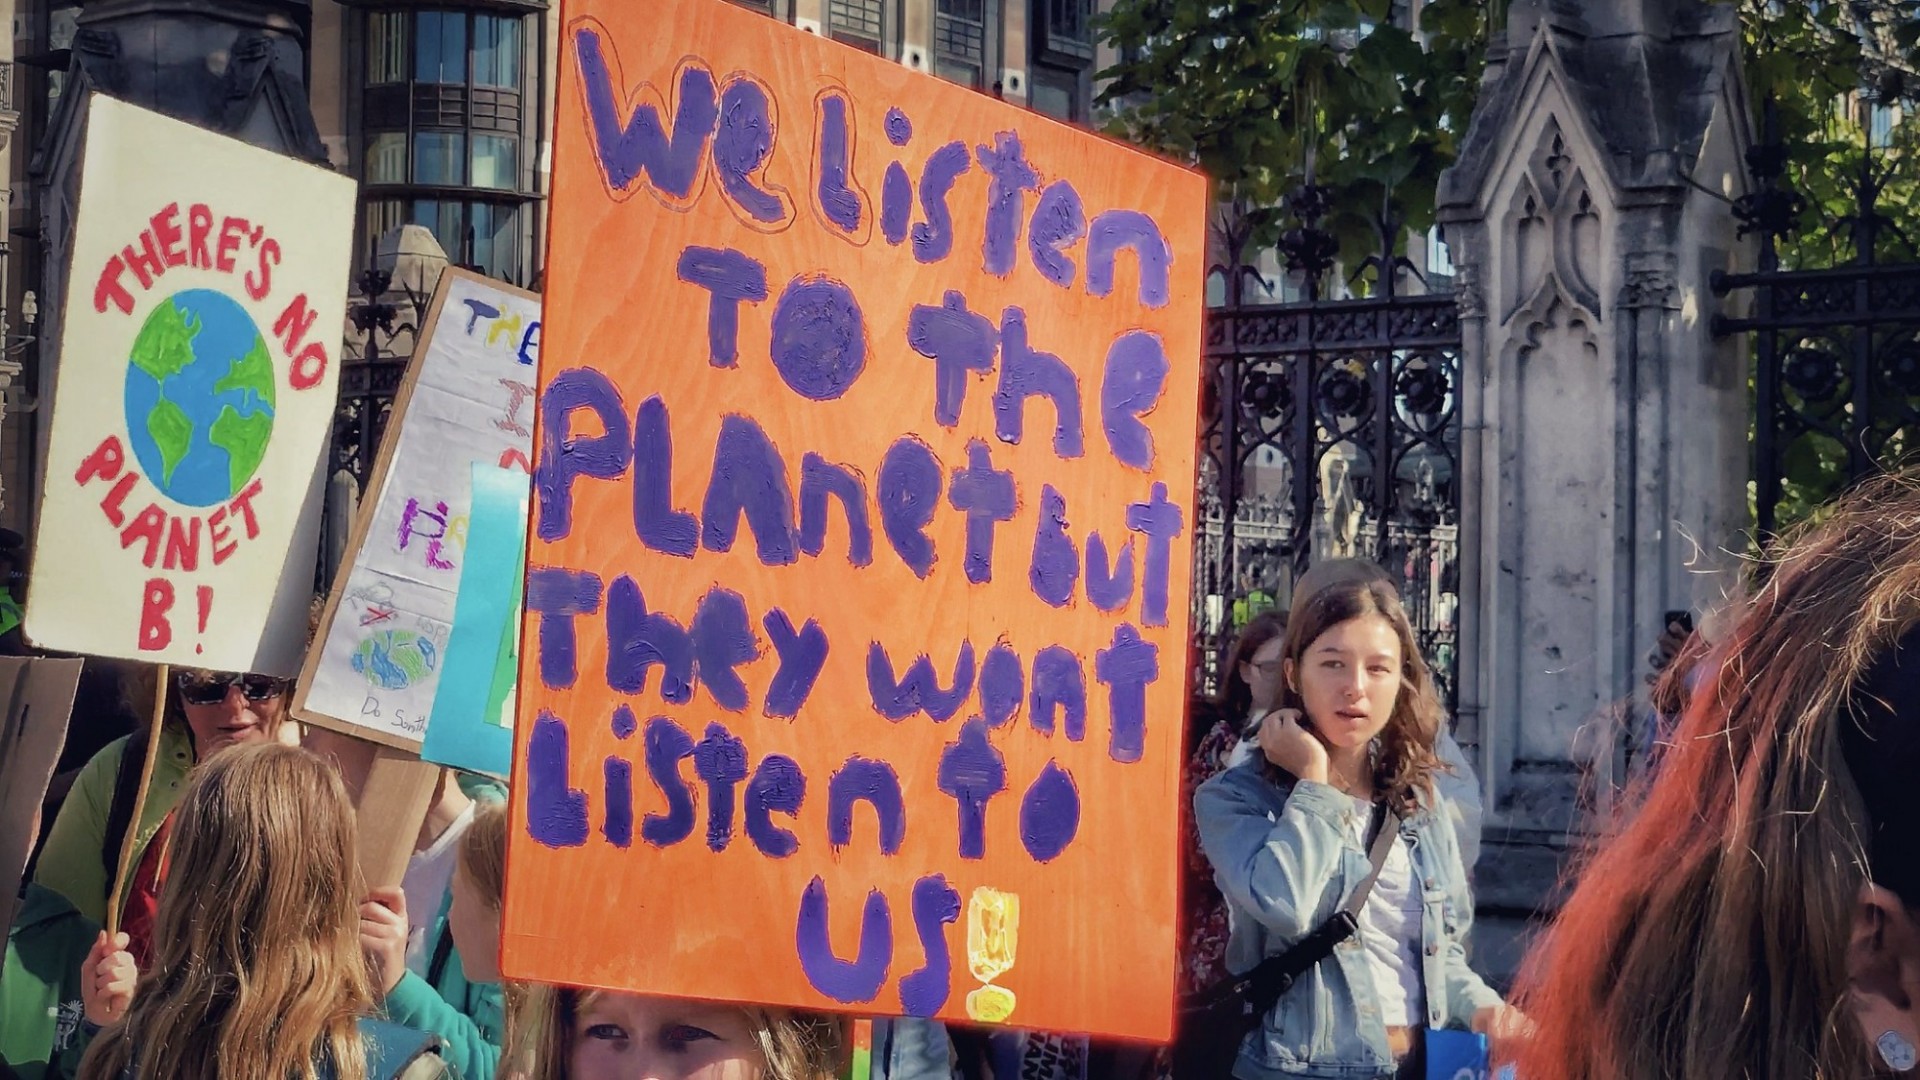 Youth climate protesters hold a sign that reads "we listen to the planet but they won't listen to us" at the Global Climate Stike  in London 